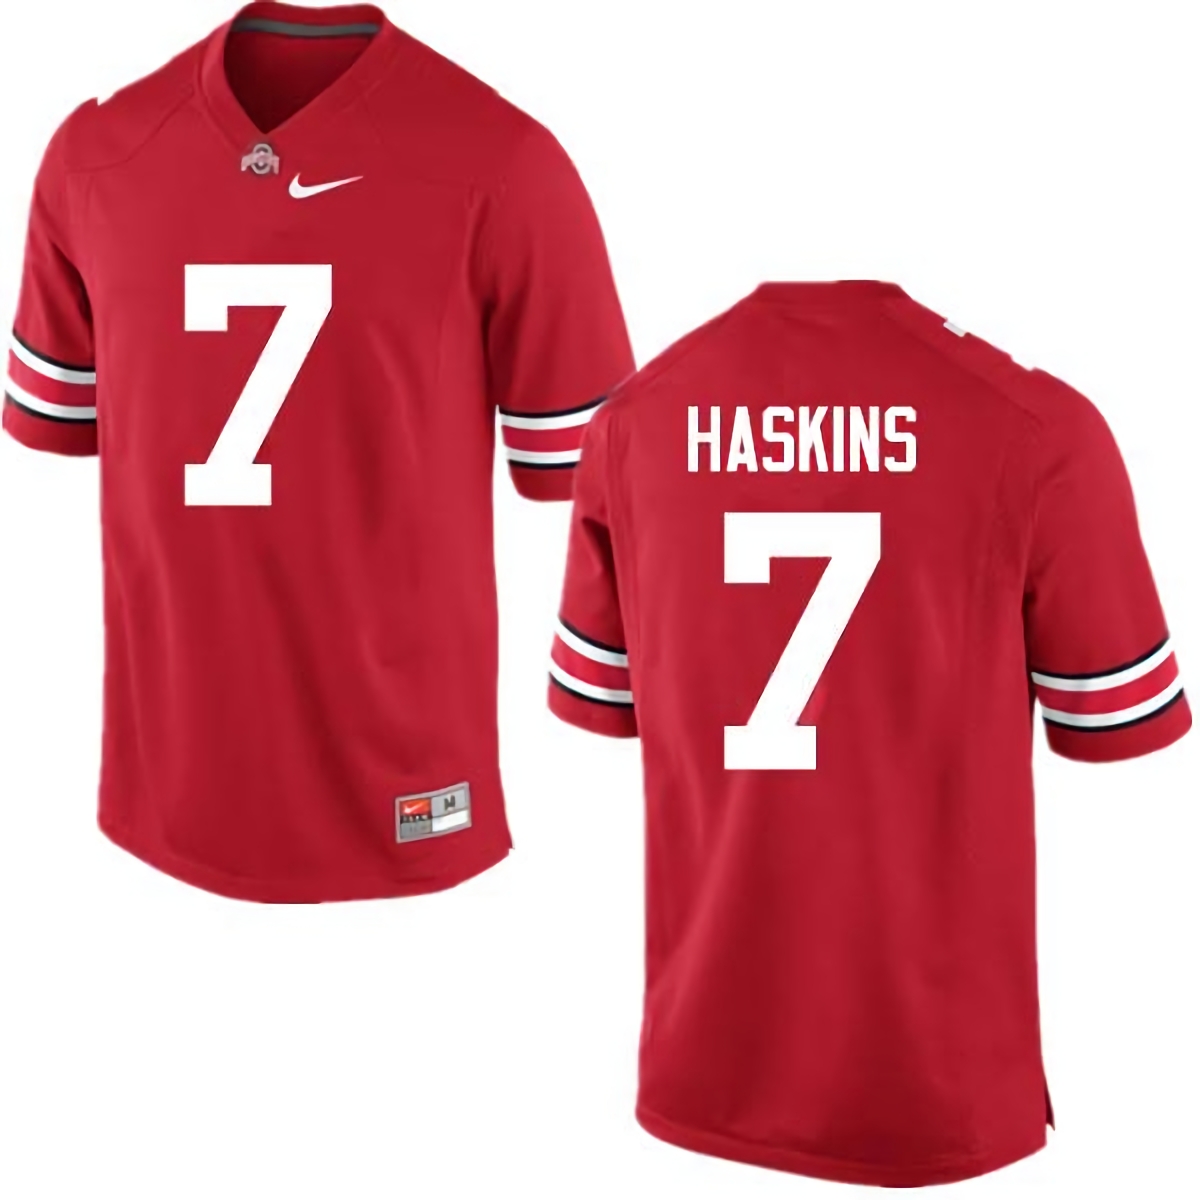 Dwayne Haskins Ohio State Buckeyes Men's NCAA #7 Nike Red College Stitched Football Jersey EGA8256WR